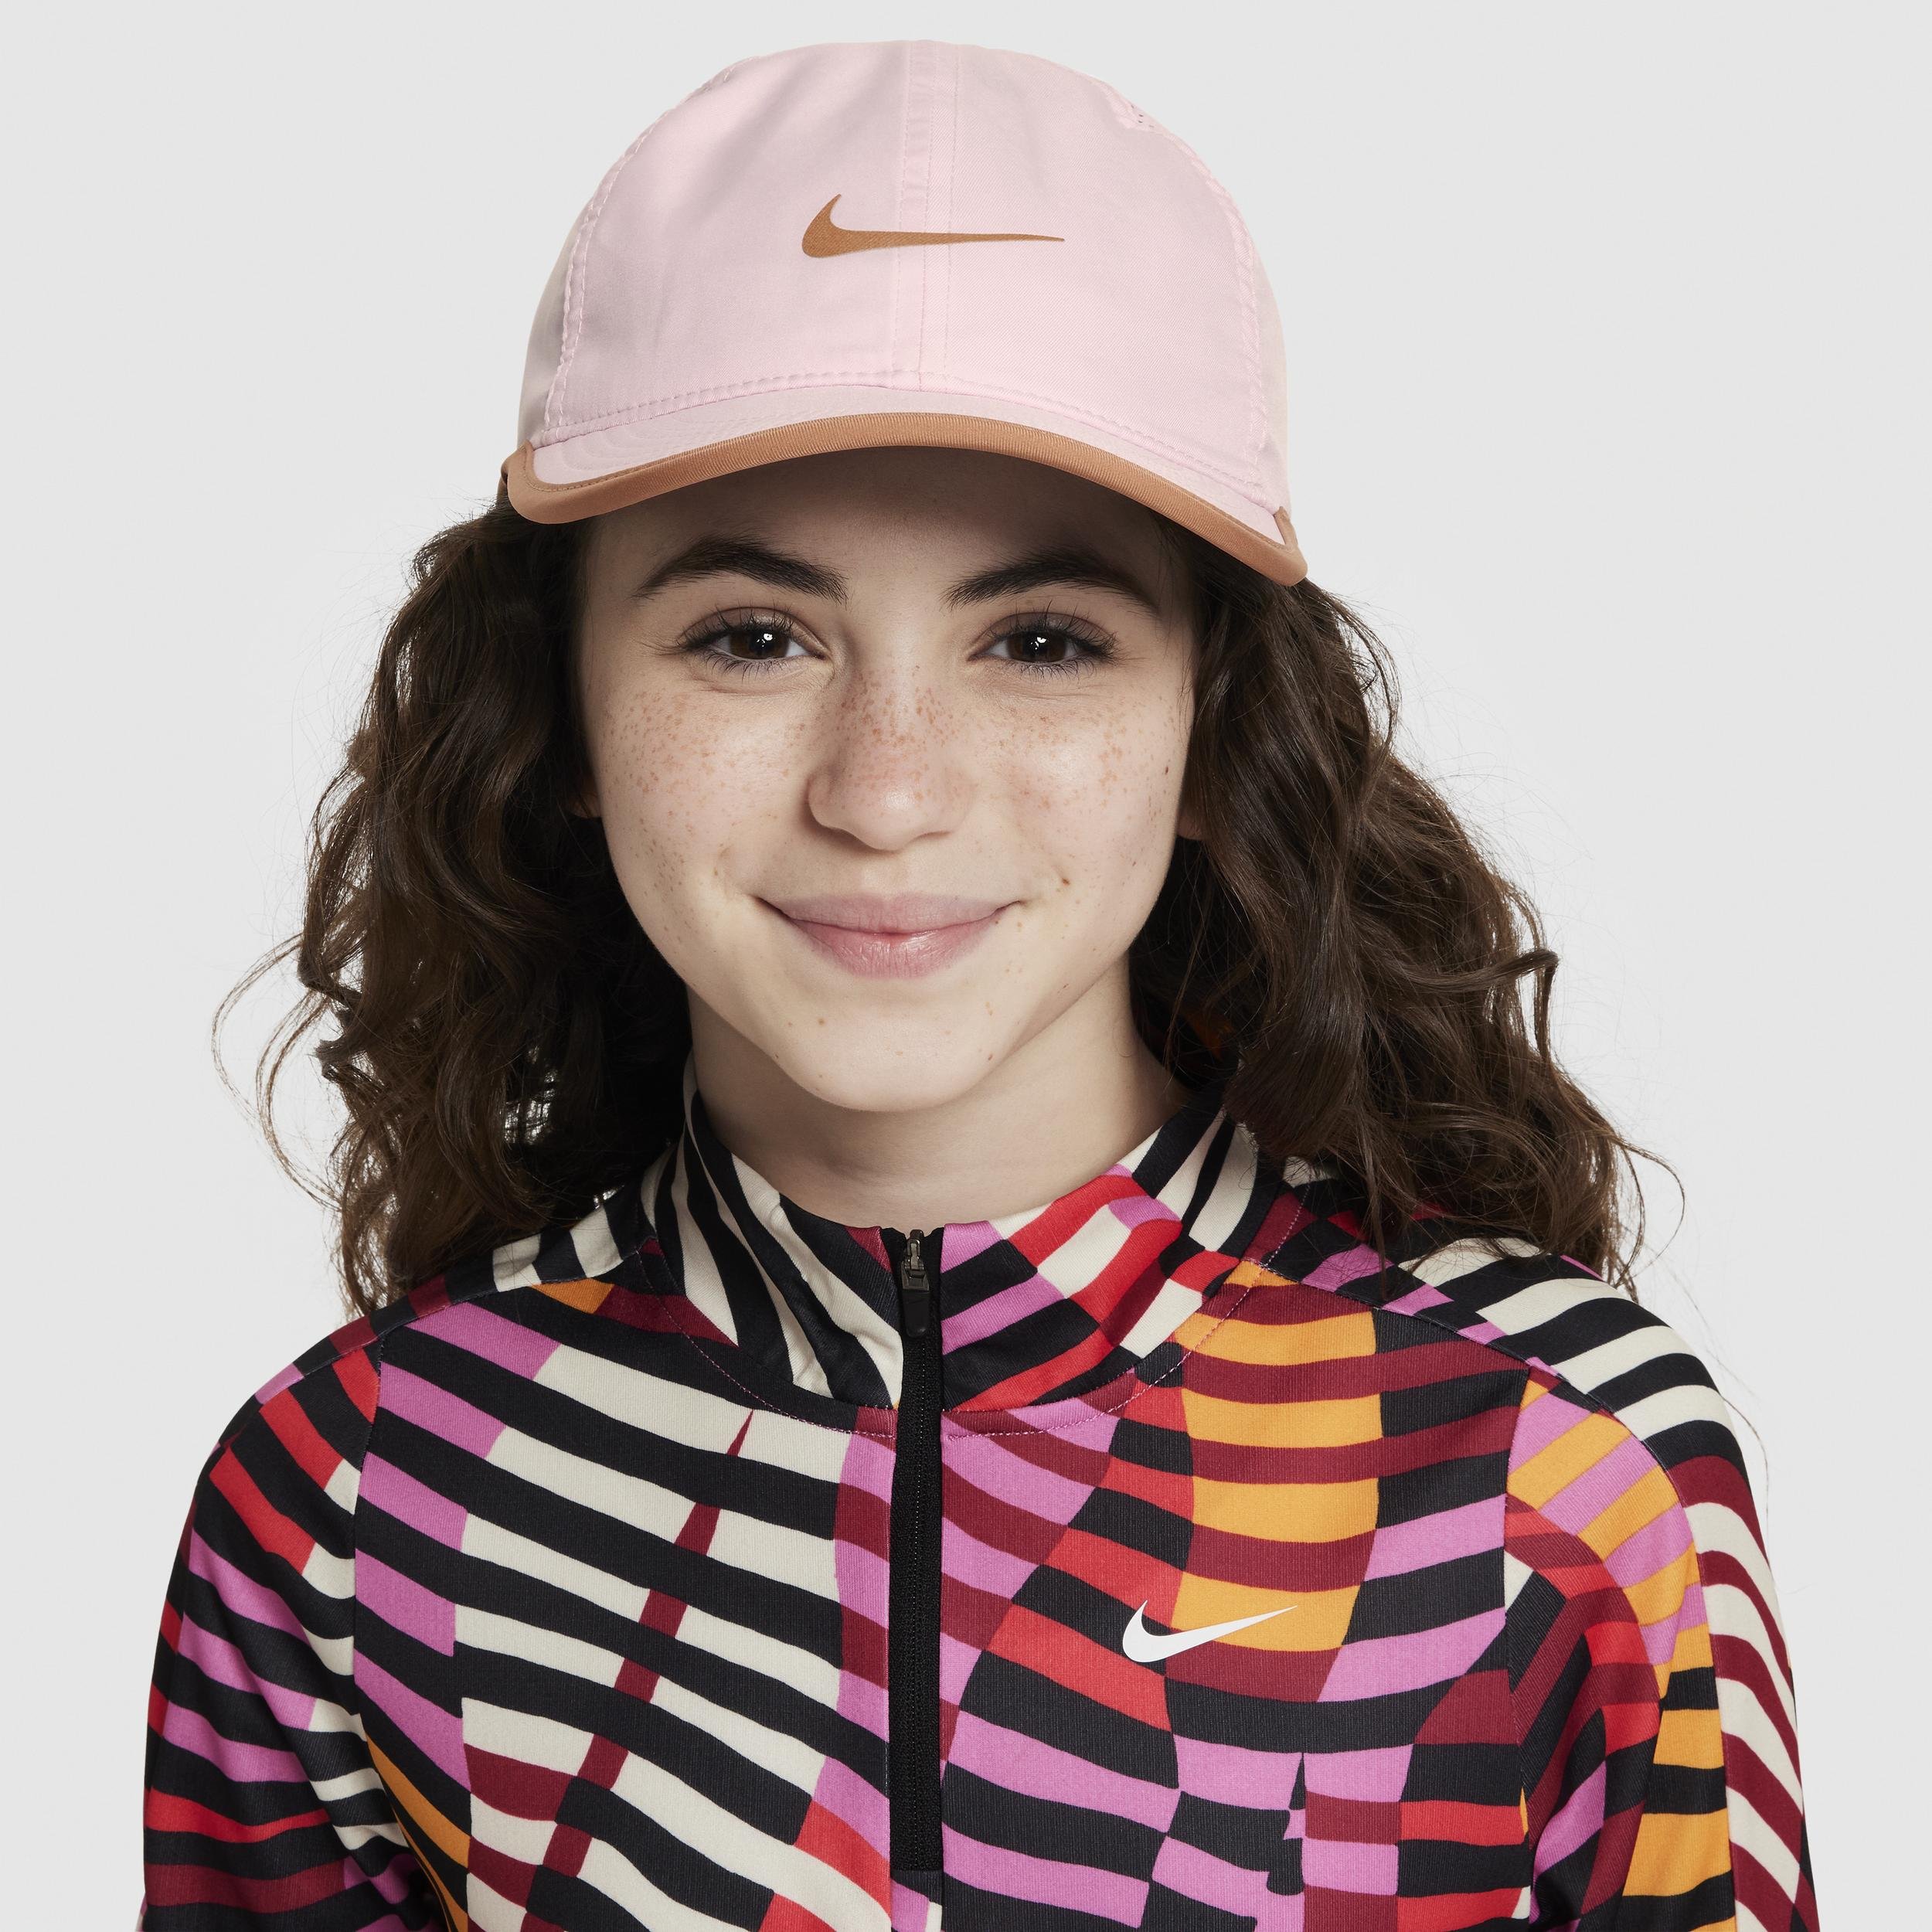 Nike Dri-FIT Club Kids' Unstructured Featherlight Cap by NIKE